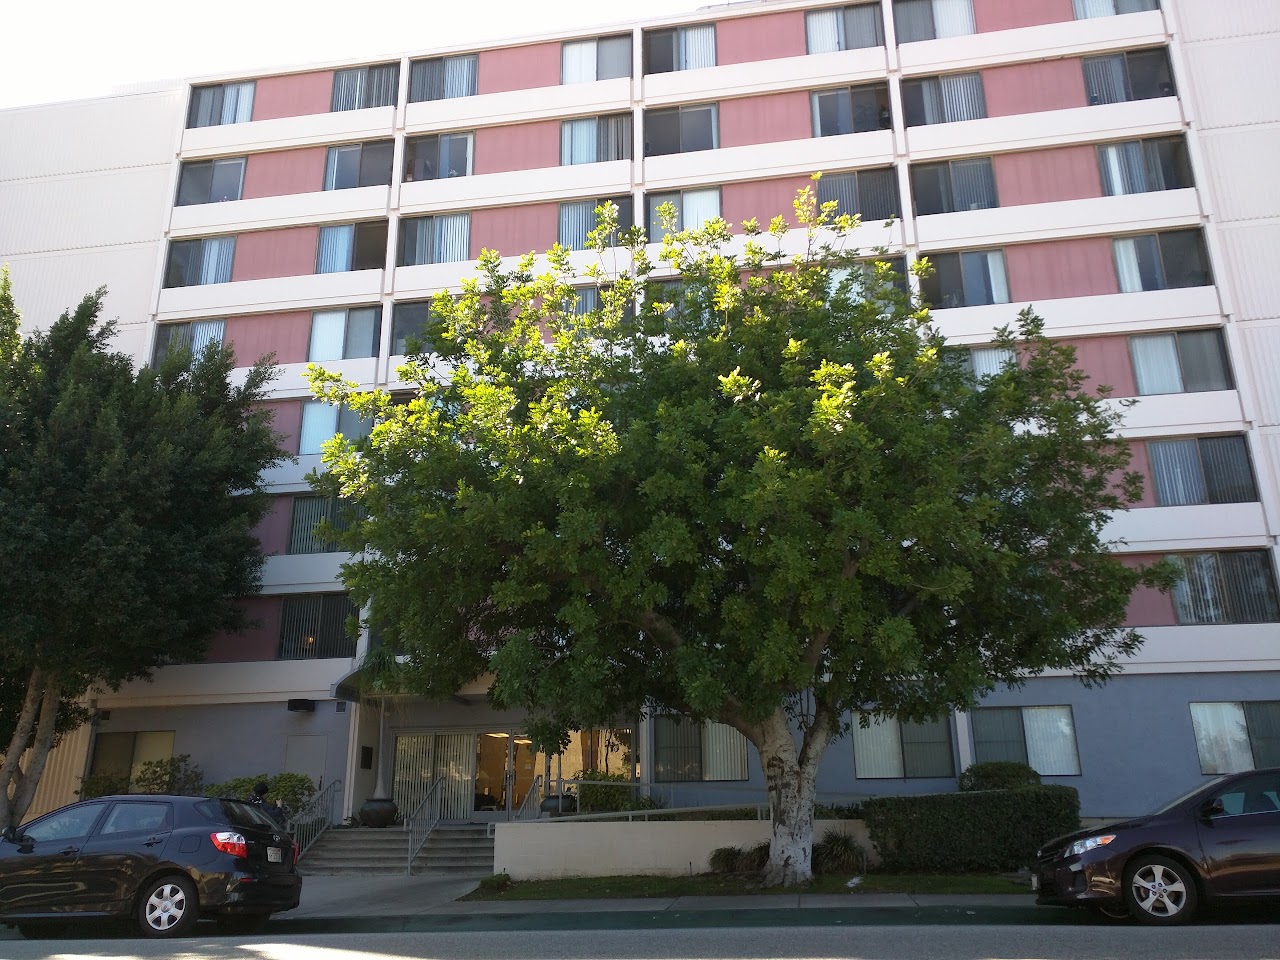 Photo of WYSONG VILLAGE APTS at 111 N CHAPEL AVE ALHAMBRA, CA 91801